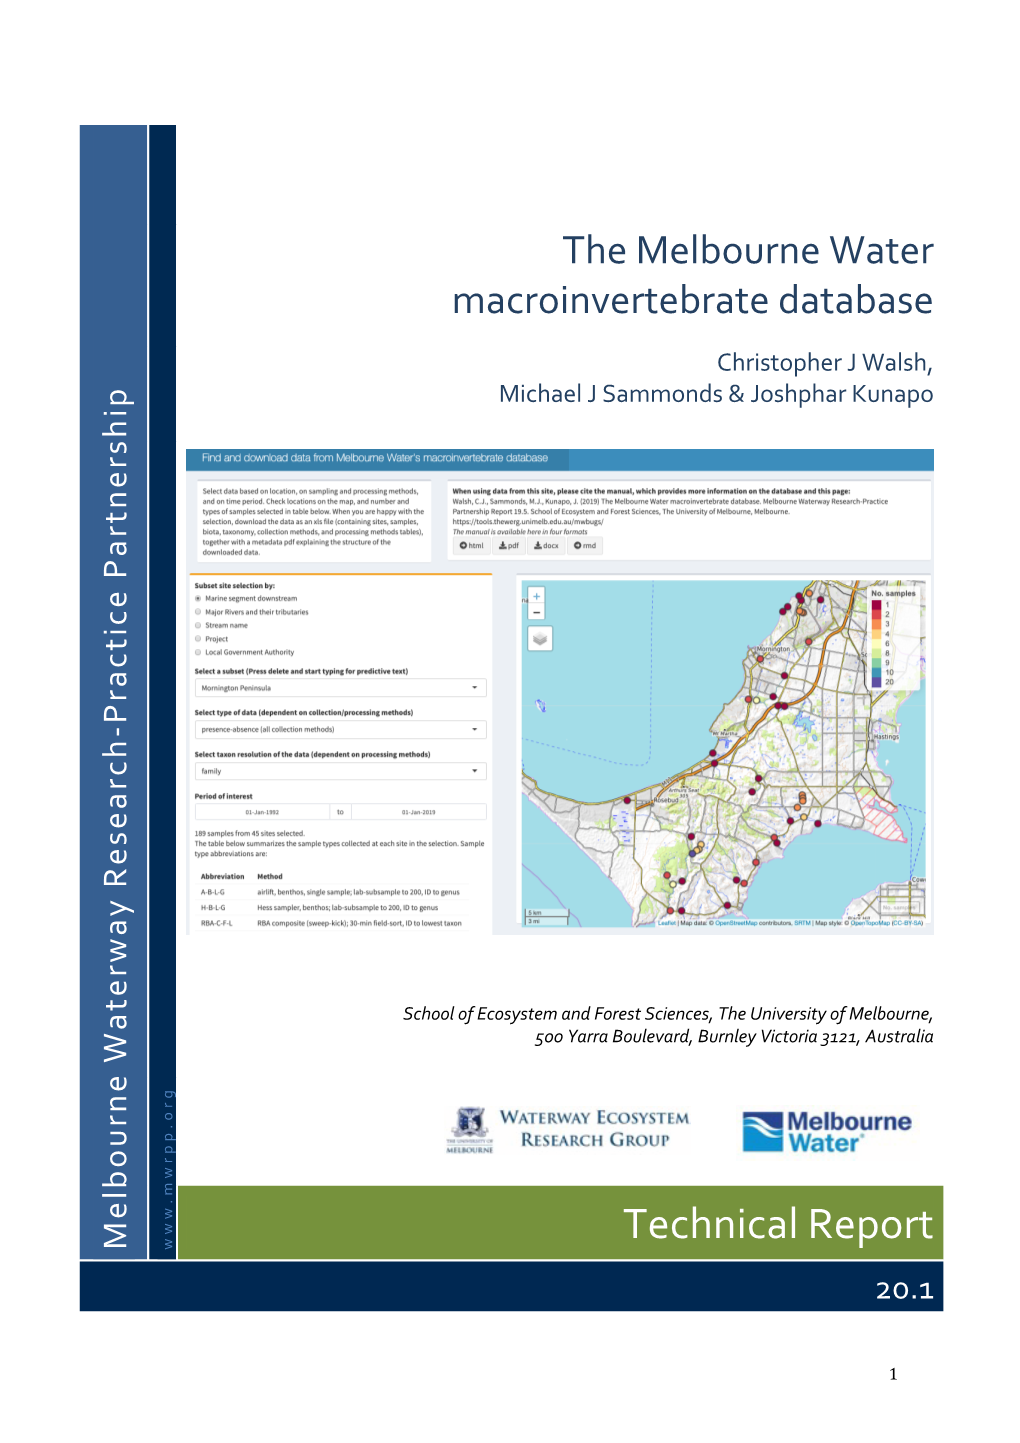 Technical Report Melbourne Waterway Research Waterway Melbourne 20.1